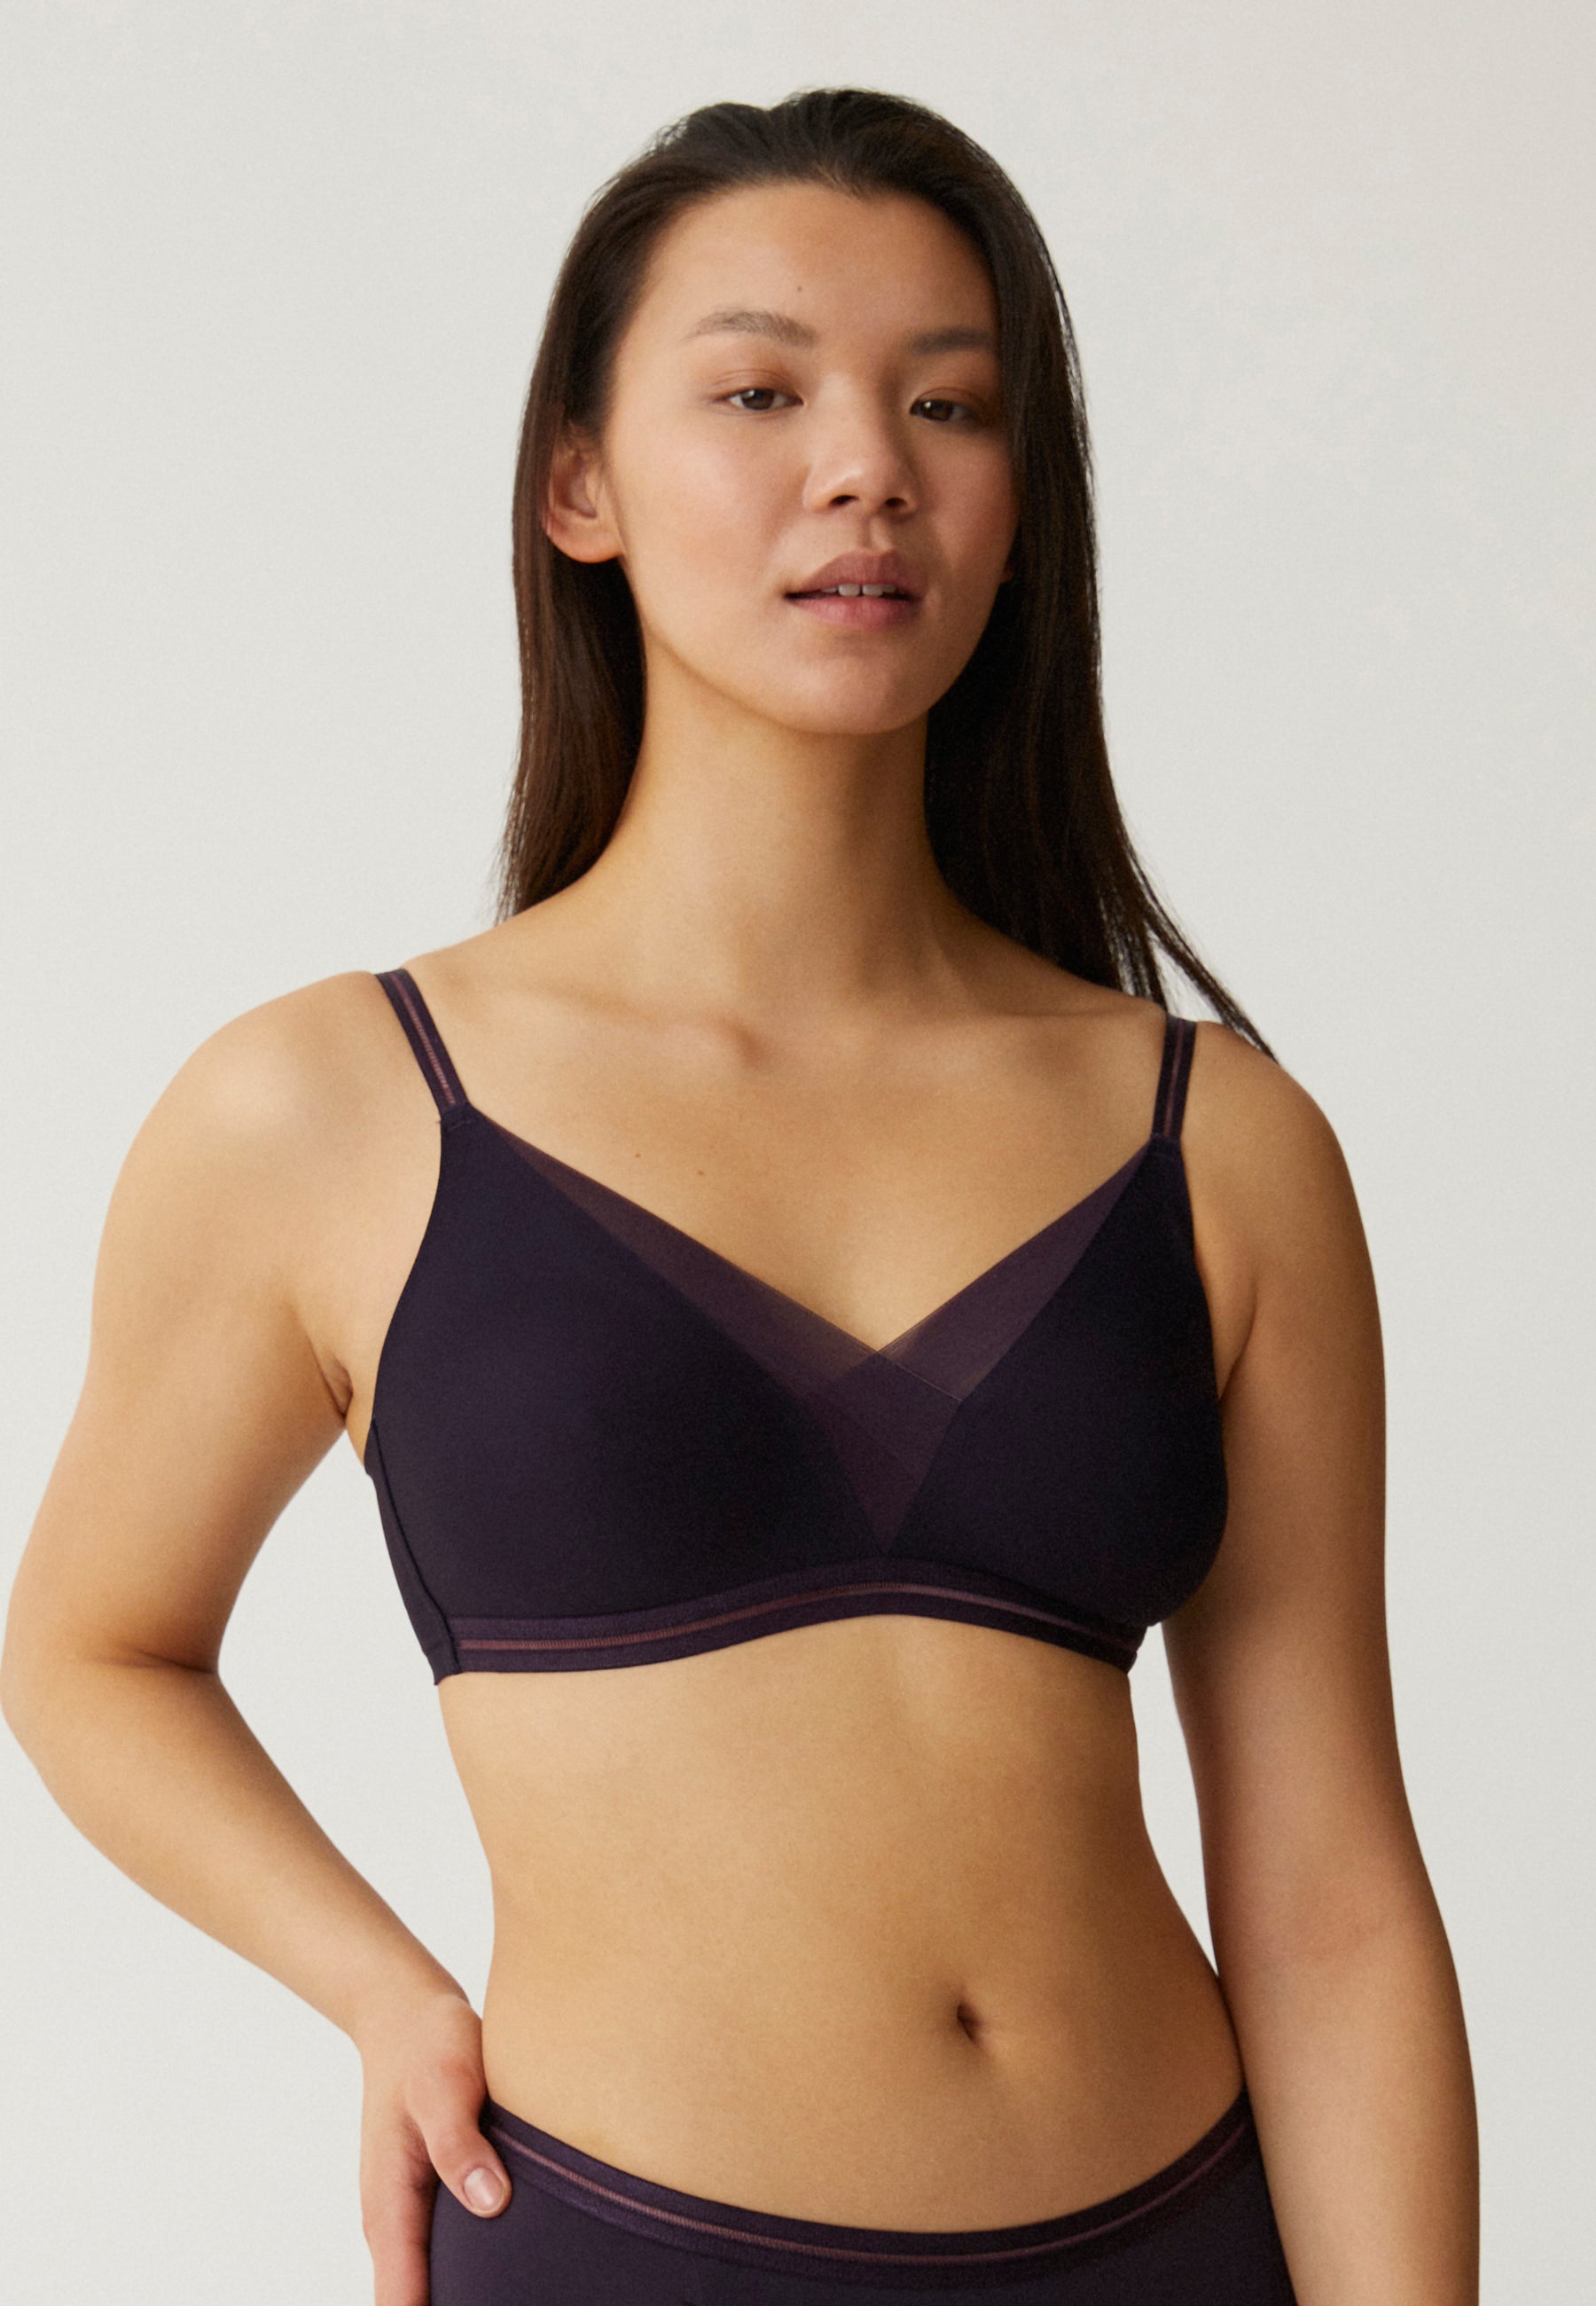 Naturana Soft Full Cup Cotton Lined Non Wired Bra 86666 RRP £17.95